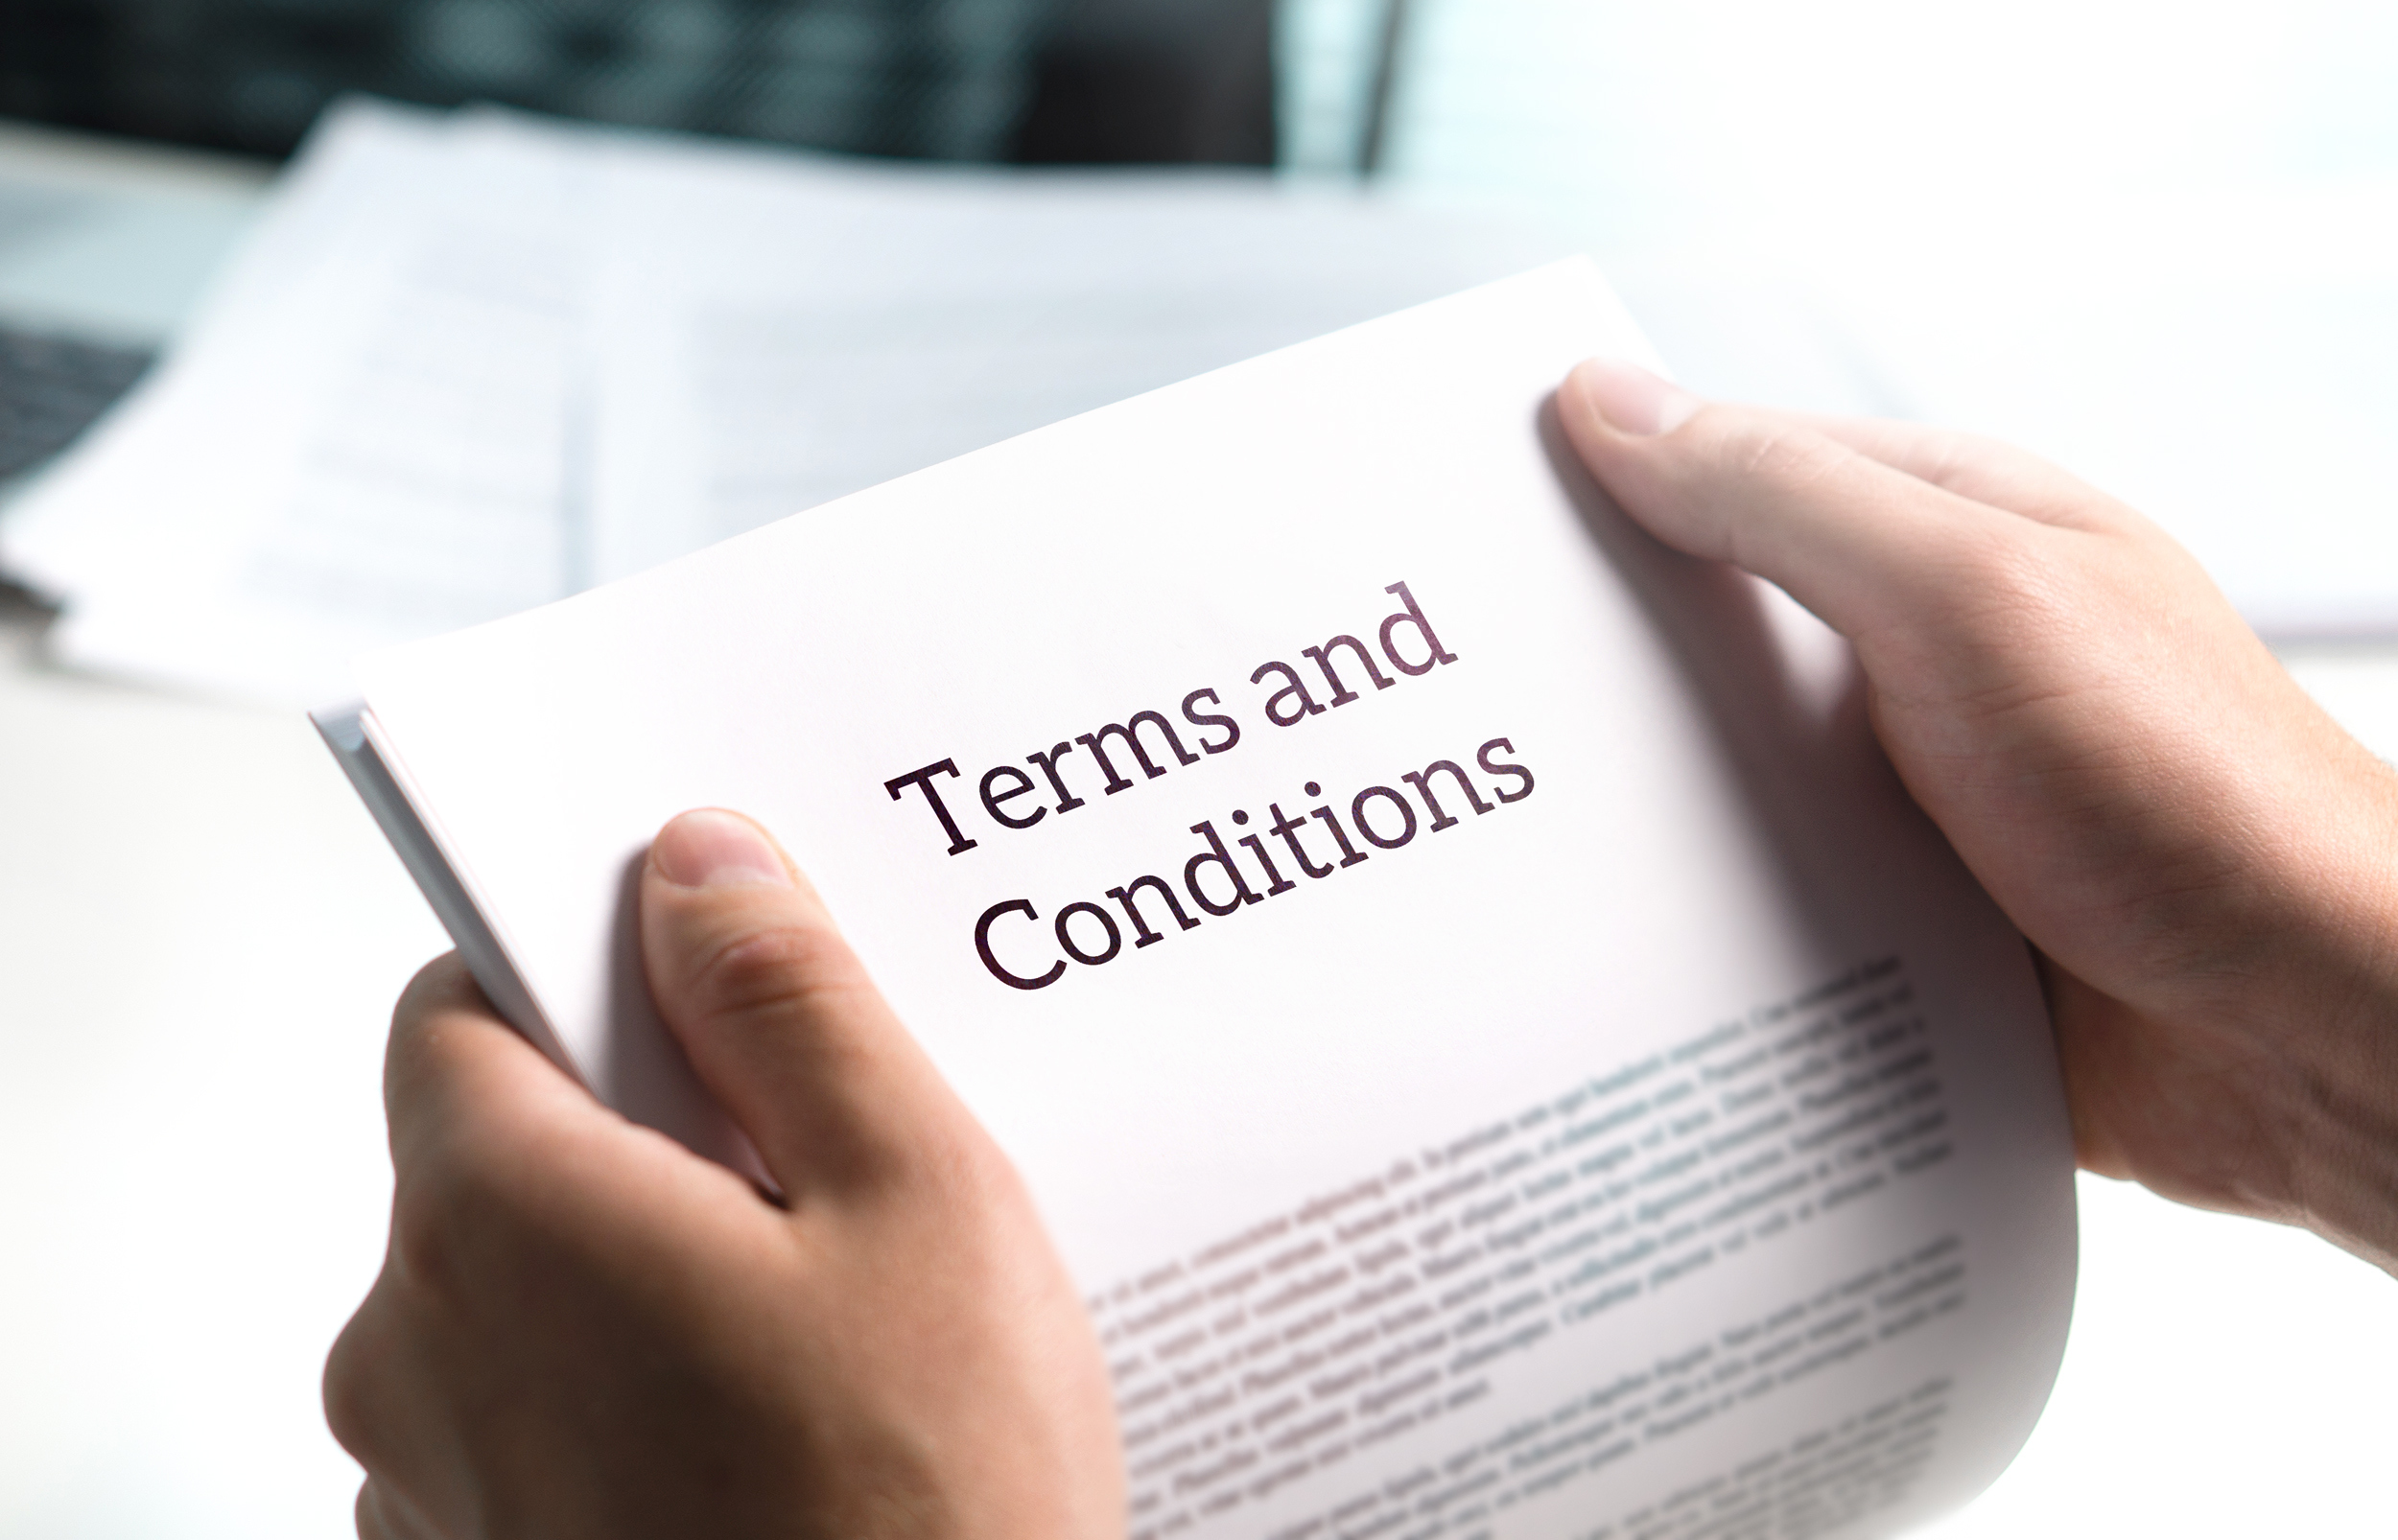 Purchase Order Terms and Conditions